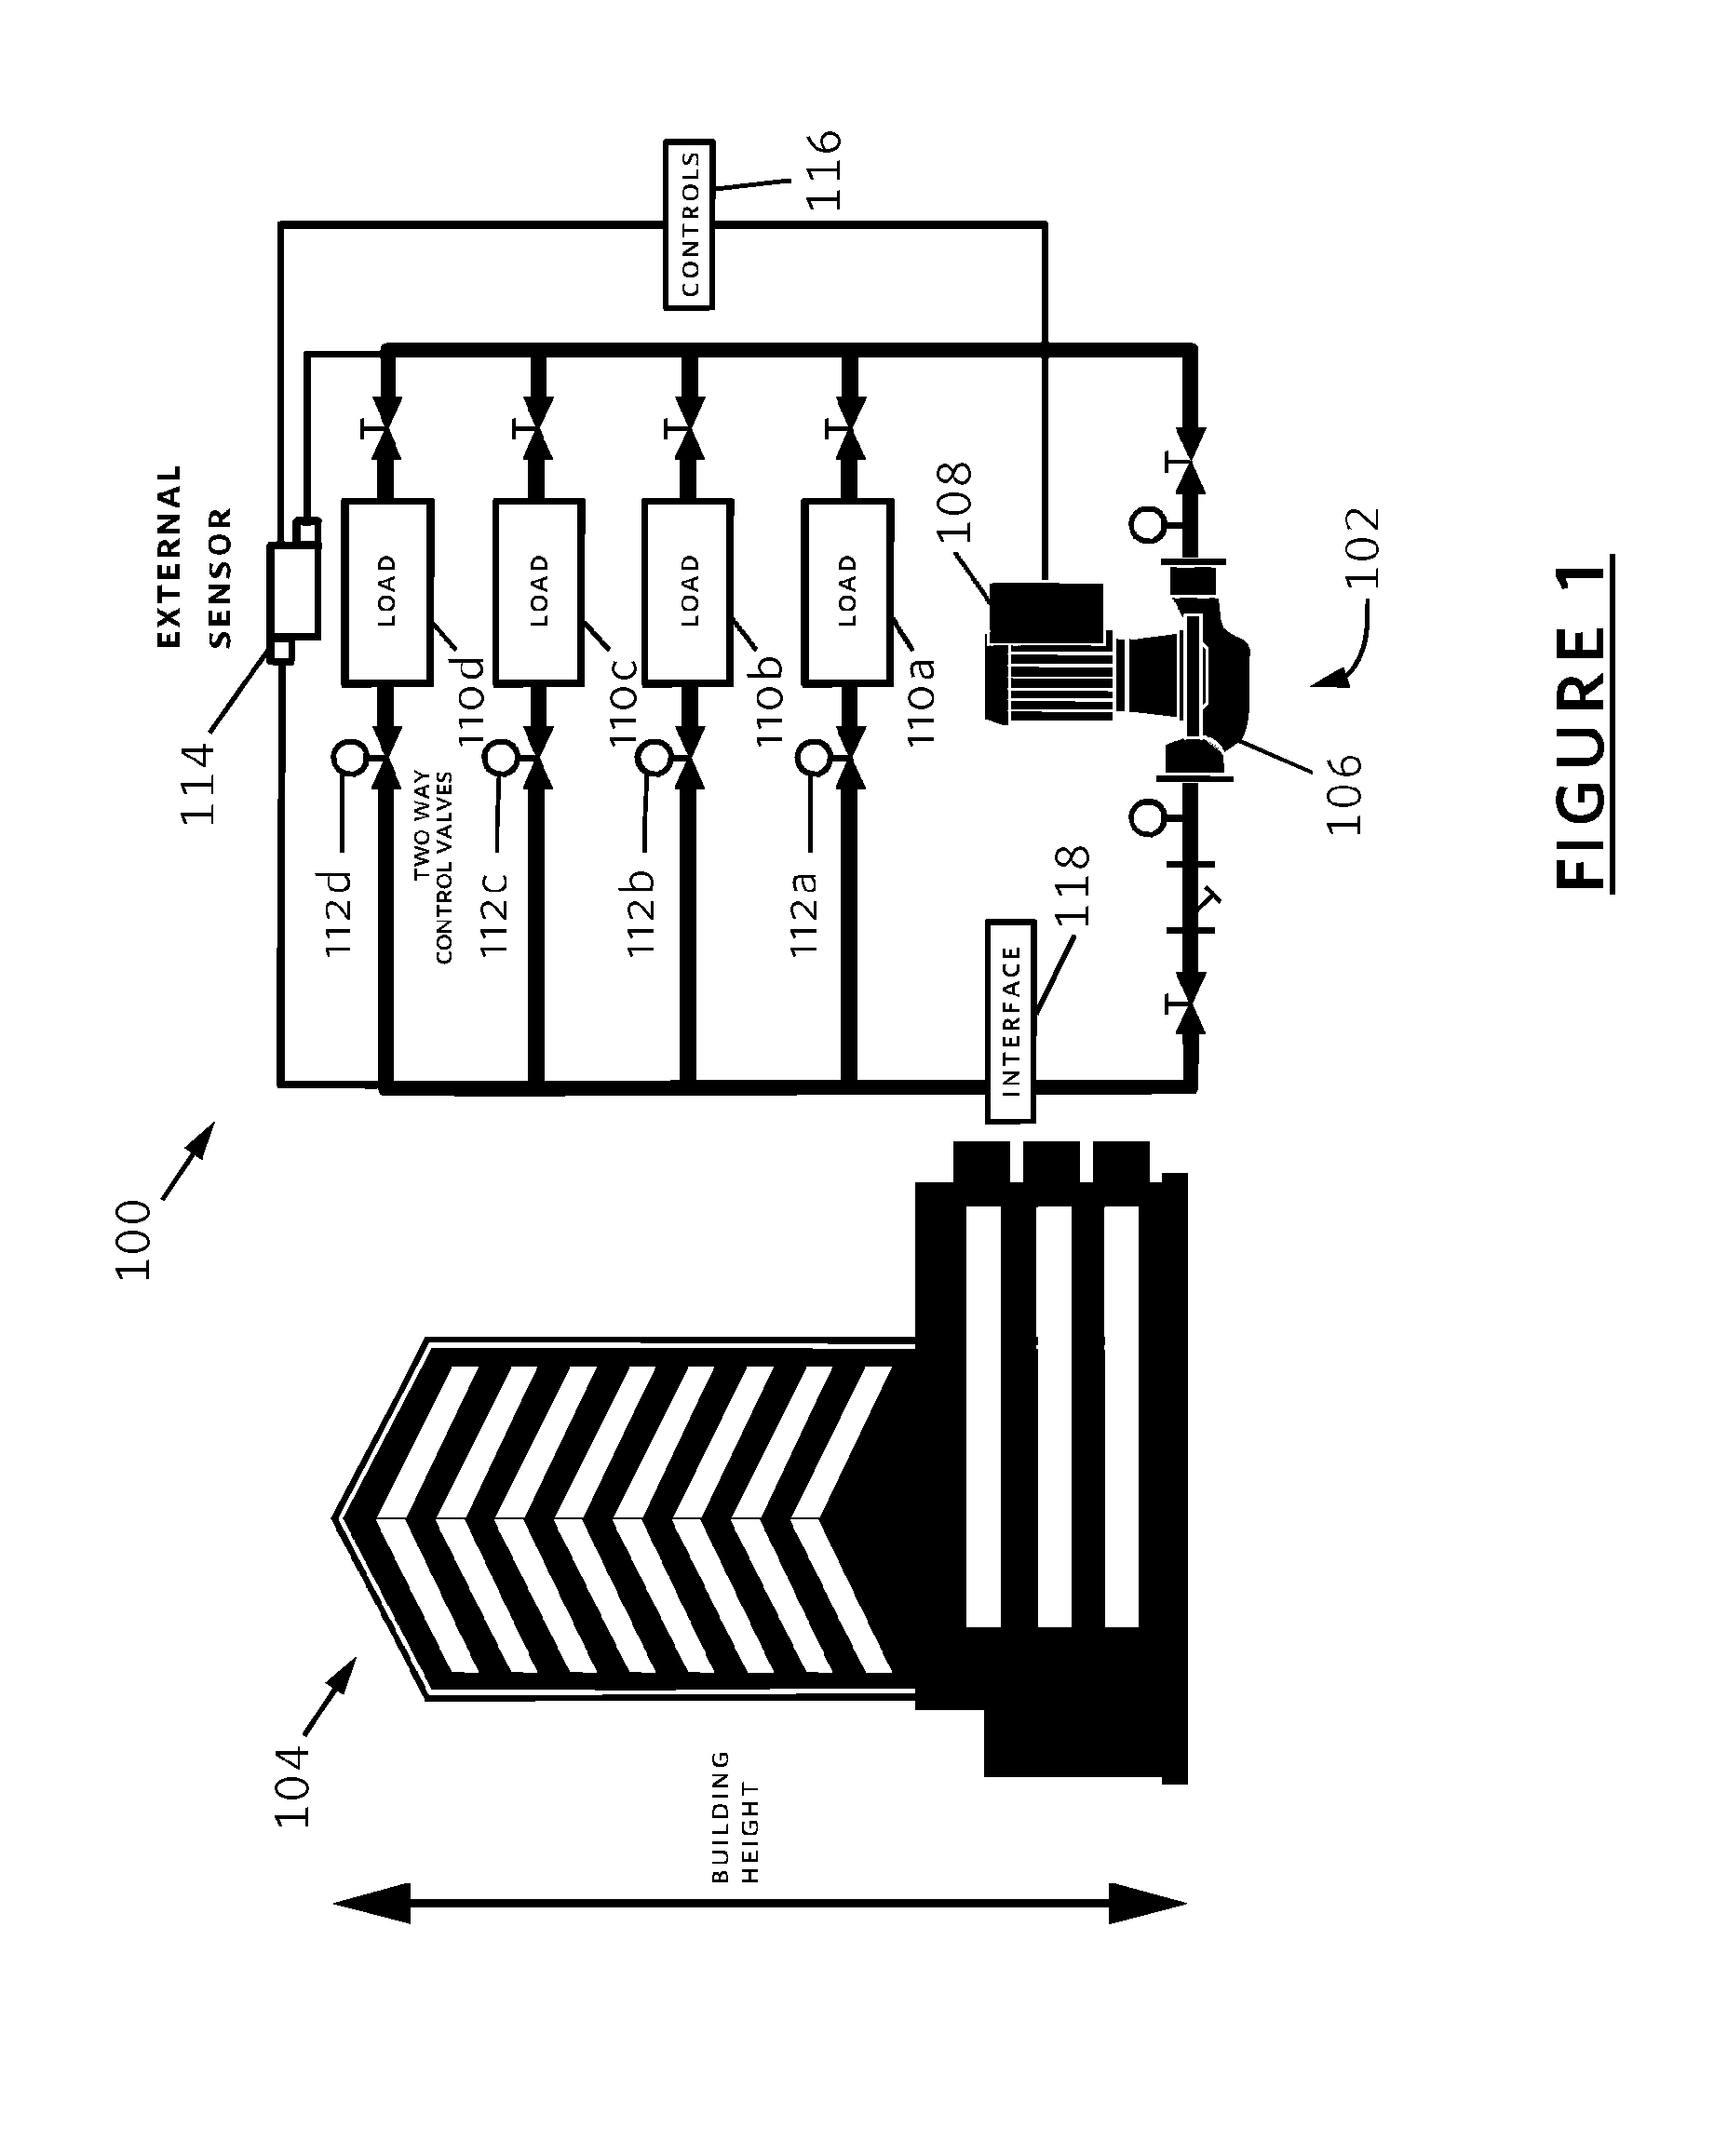 Method and System for Prioritizing a Plurality of Variable Speed Devices